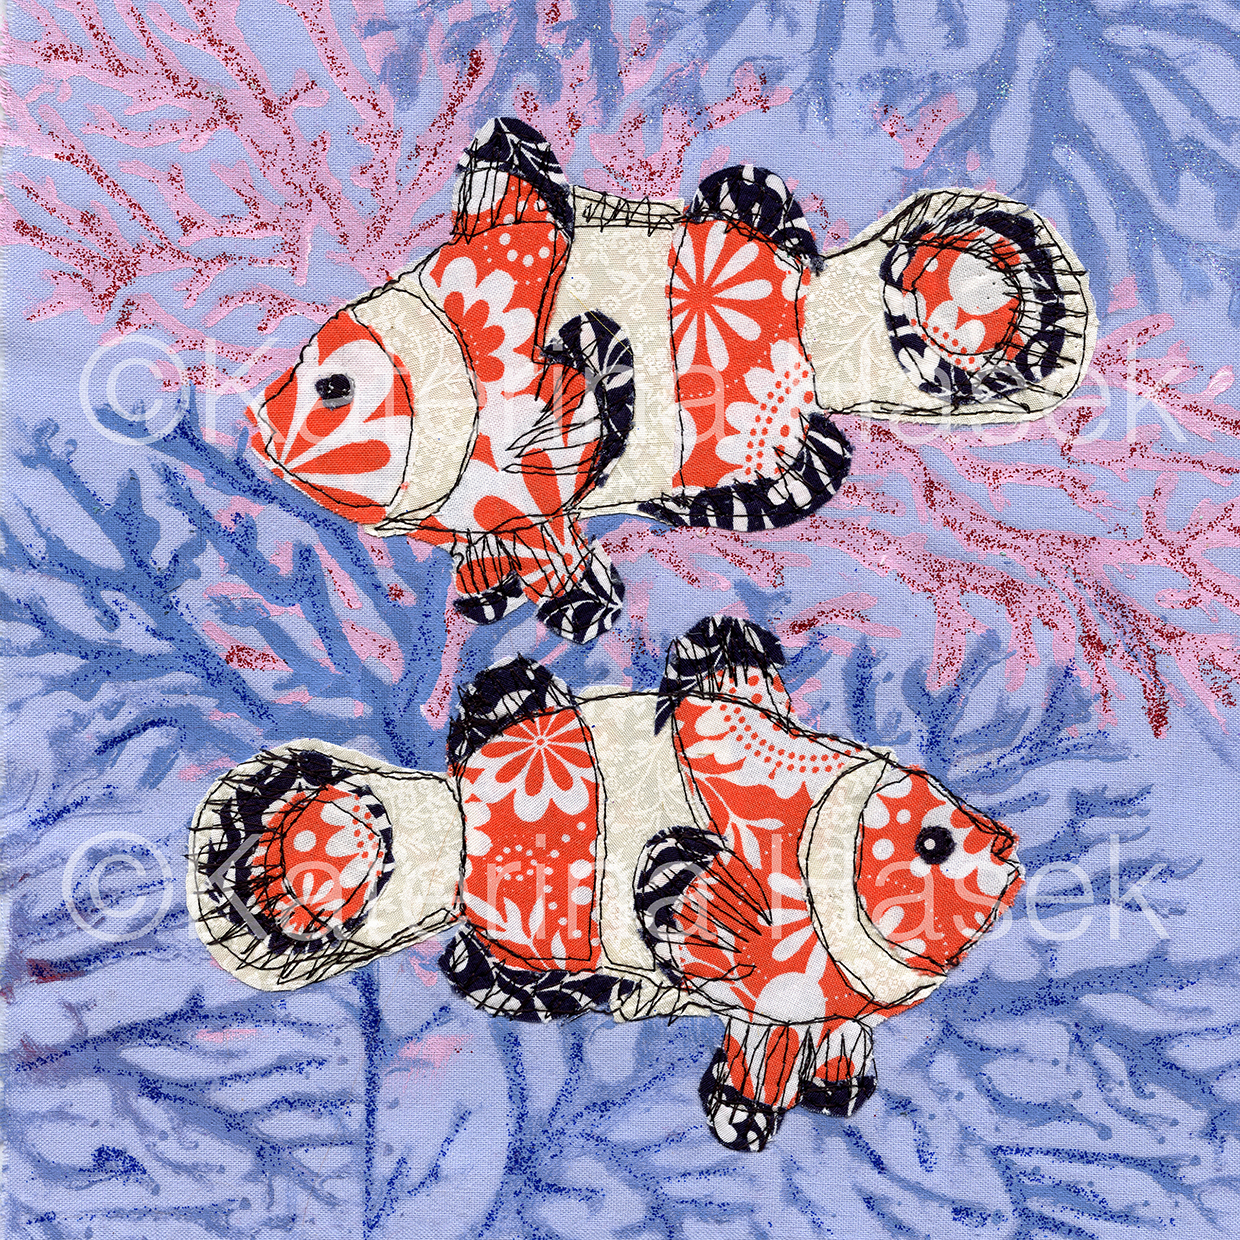 An applique image of Clownfish